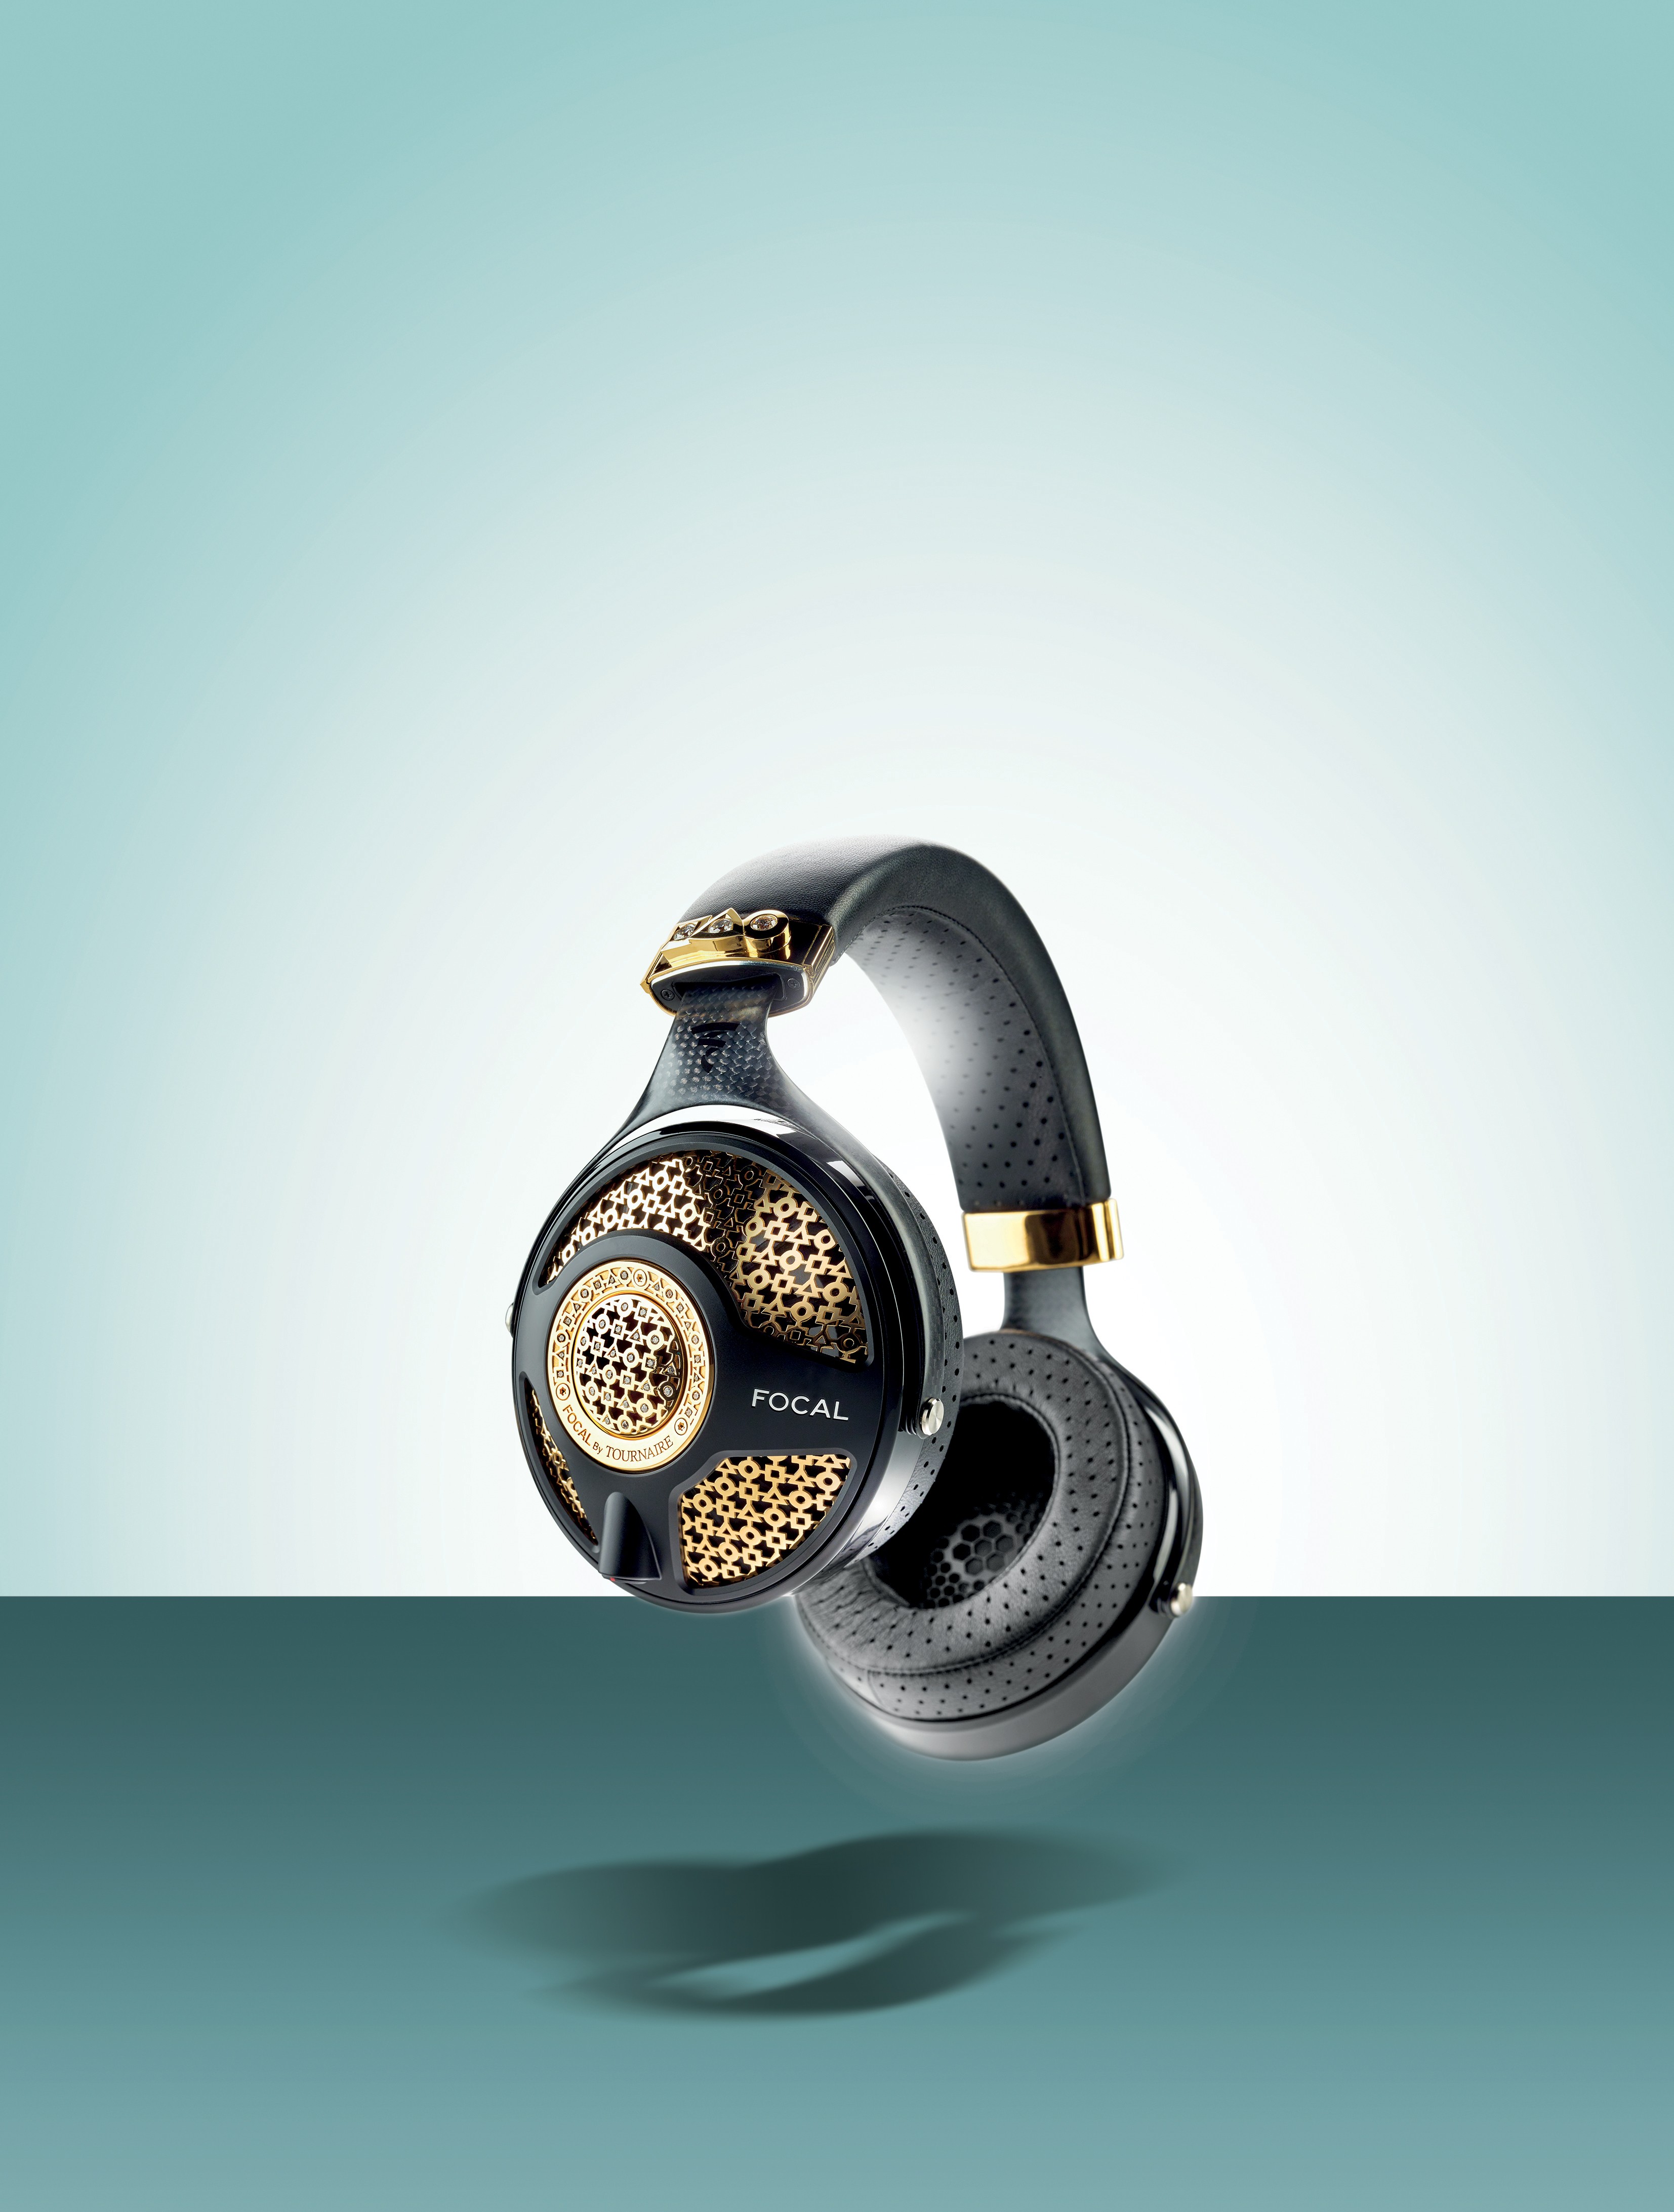 Featuring yellow gold design elements and set with 6ct of diamonds, the headphones deliver pure sound – and for a good cause